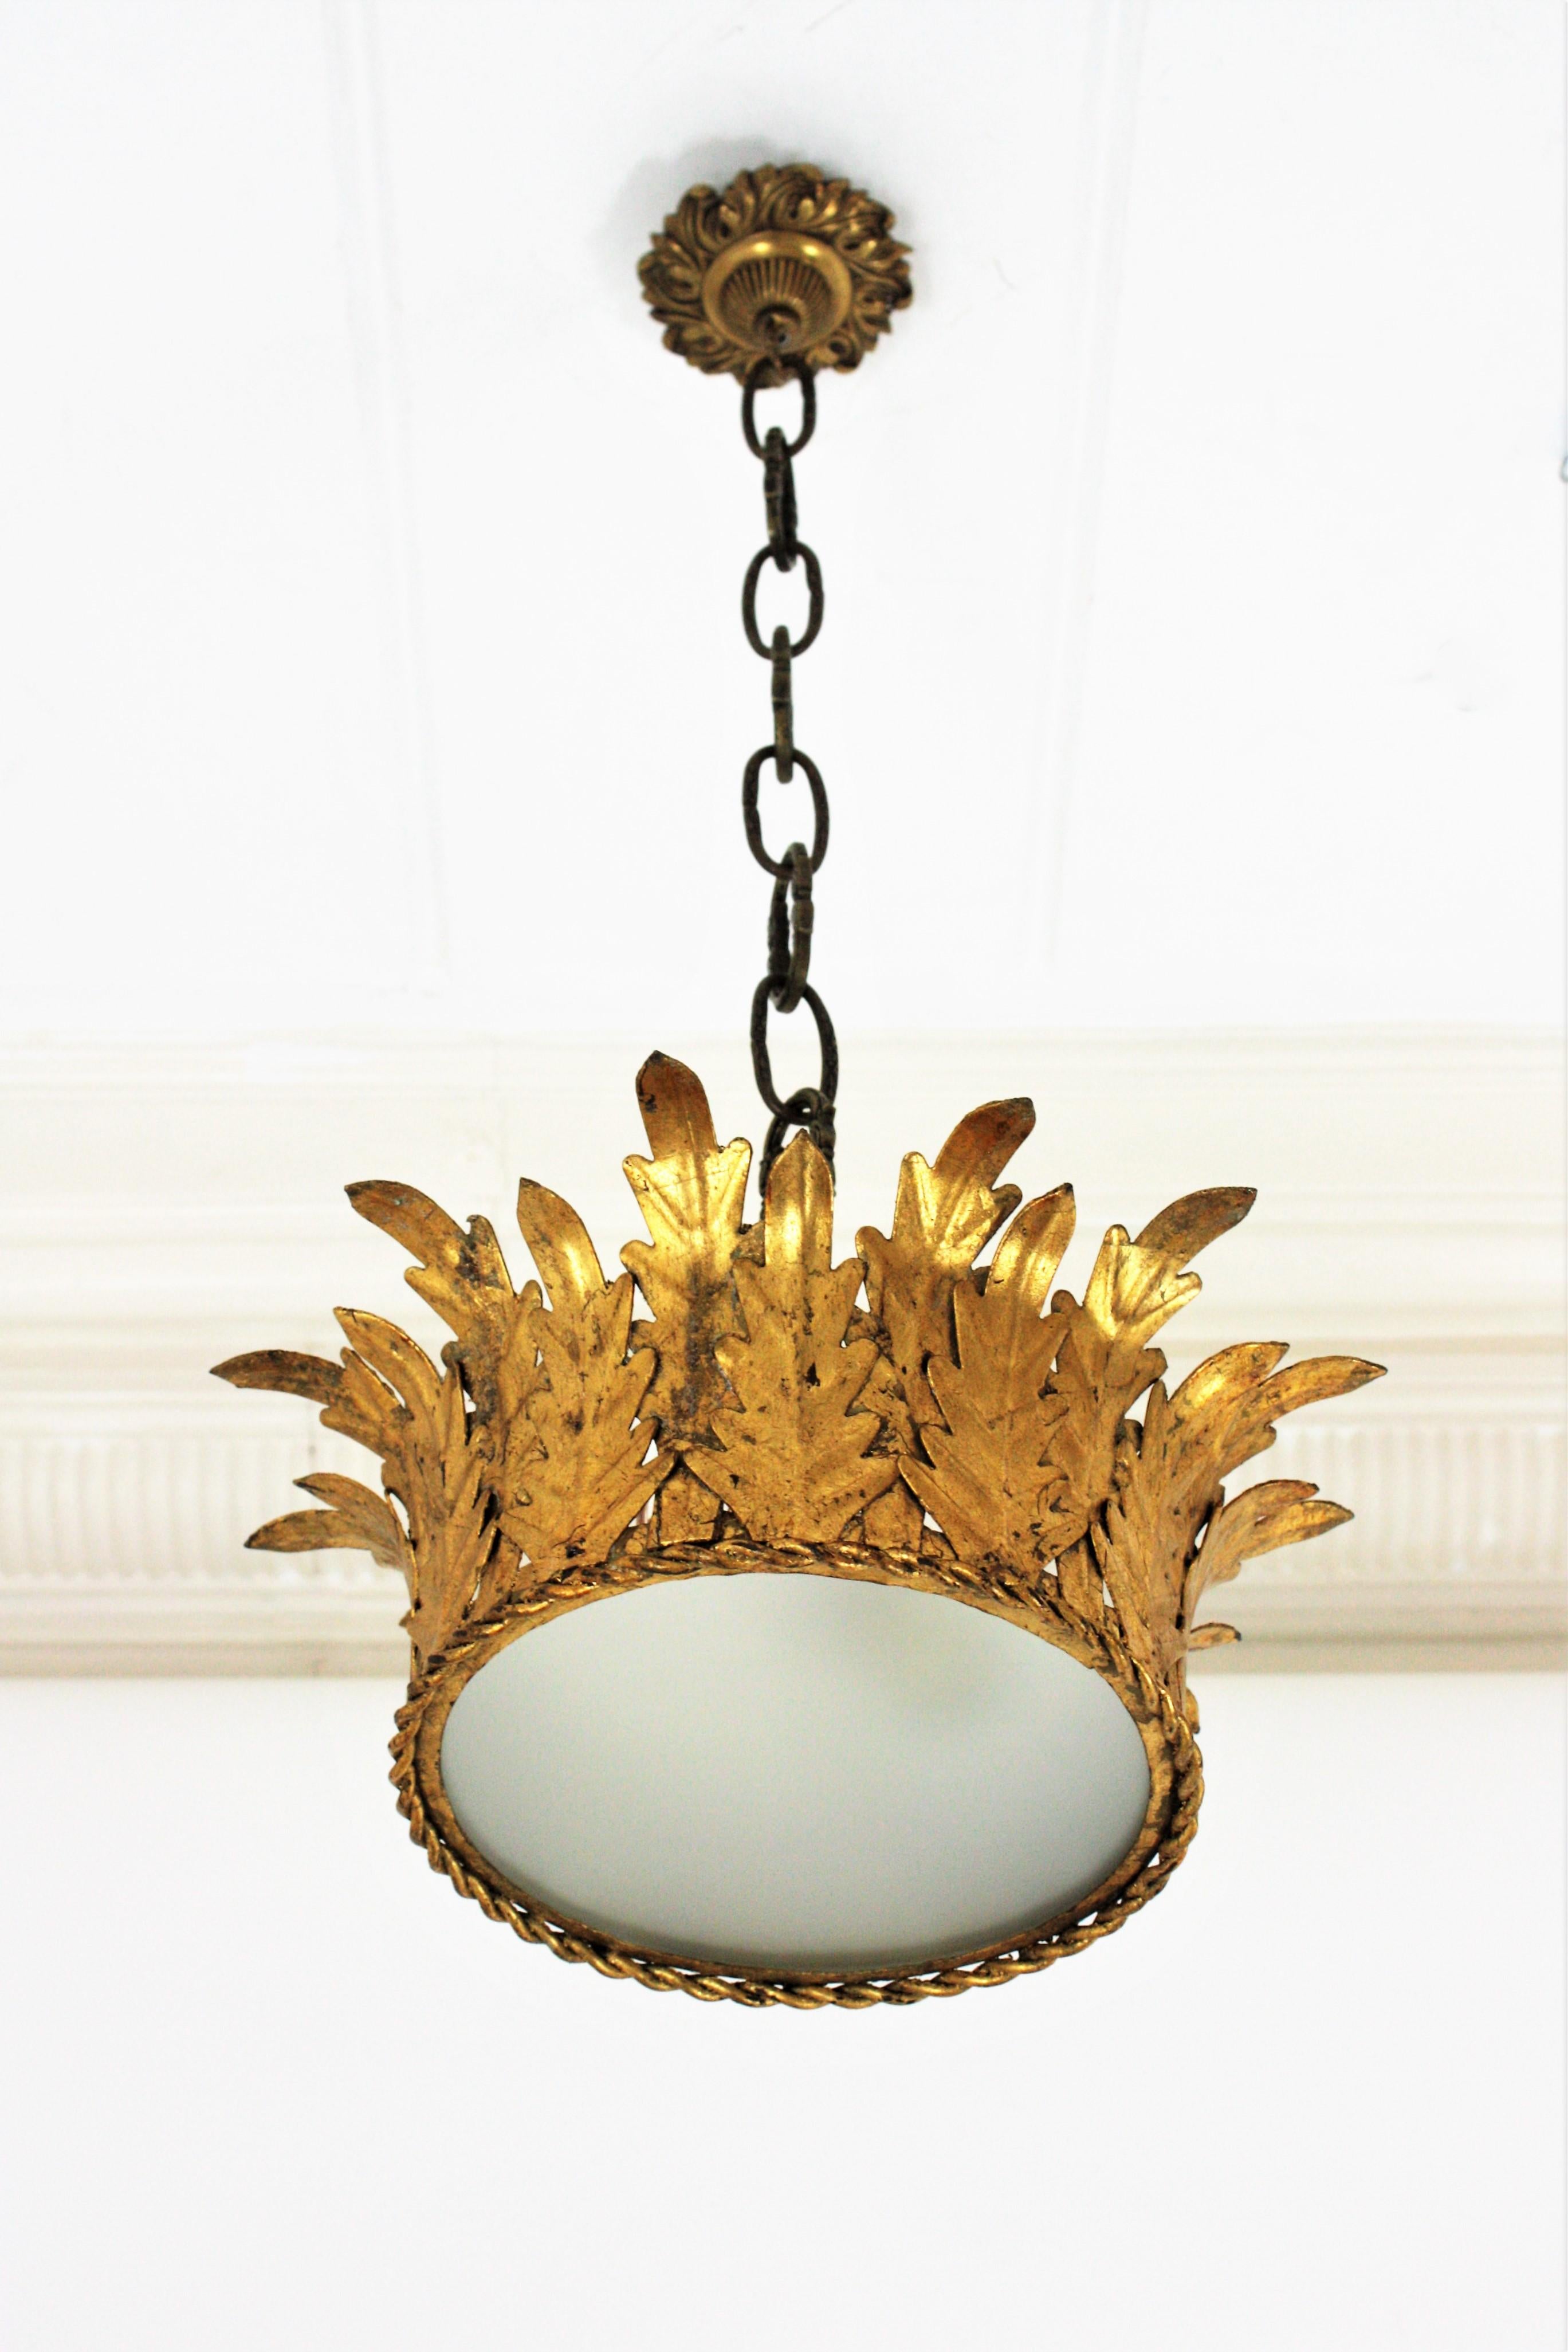 Spanish Pair of Crown Foliage Ceiling Light Fixtures in Gilt Iron and Frosted Glass